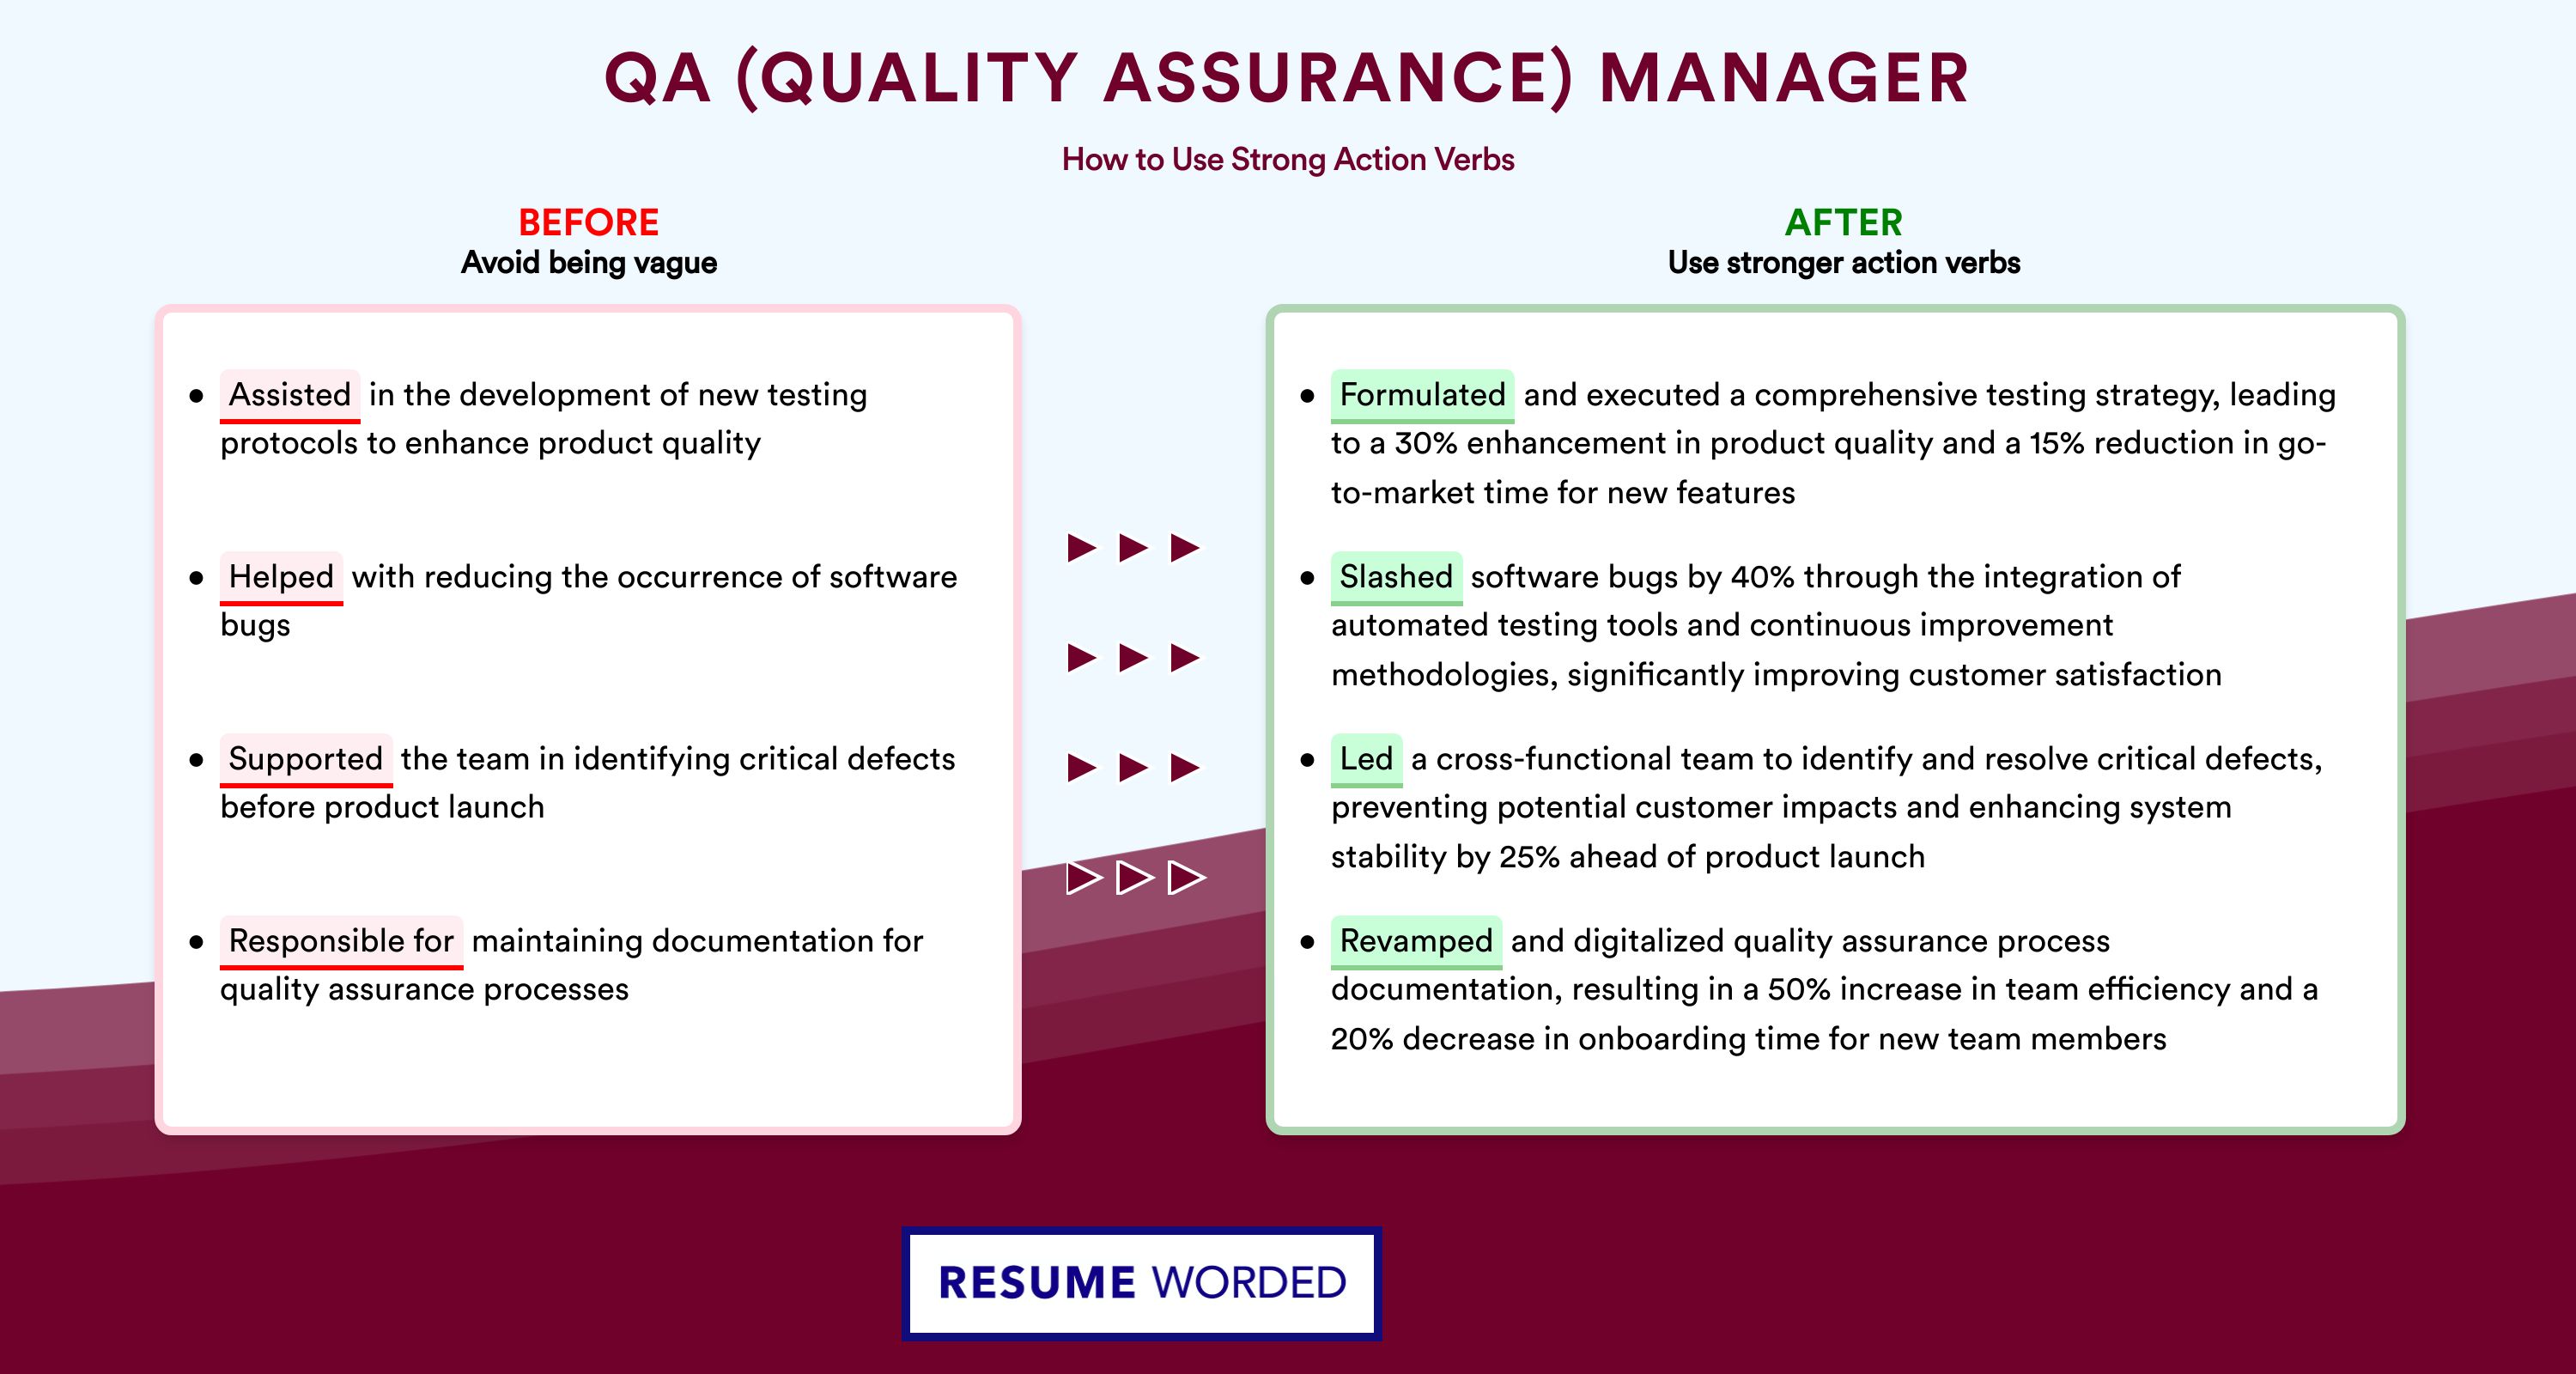 Action Verbs for QA (Quality Assurance) Manager